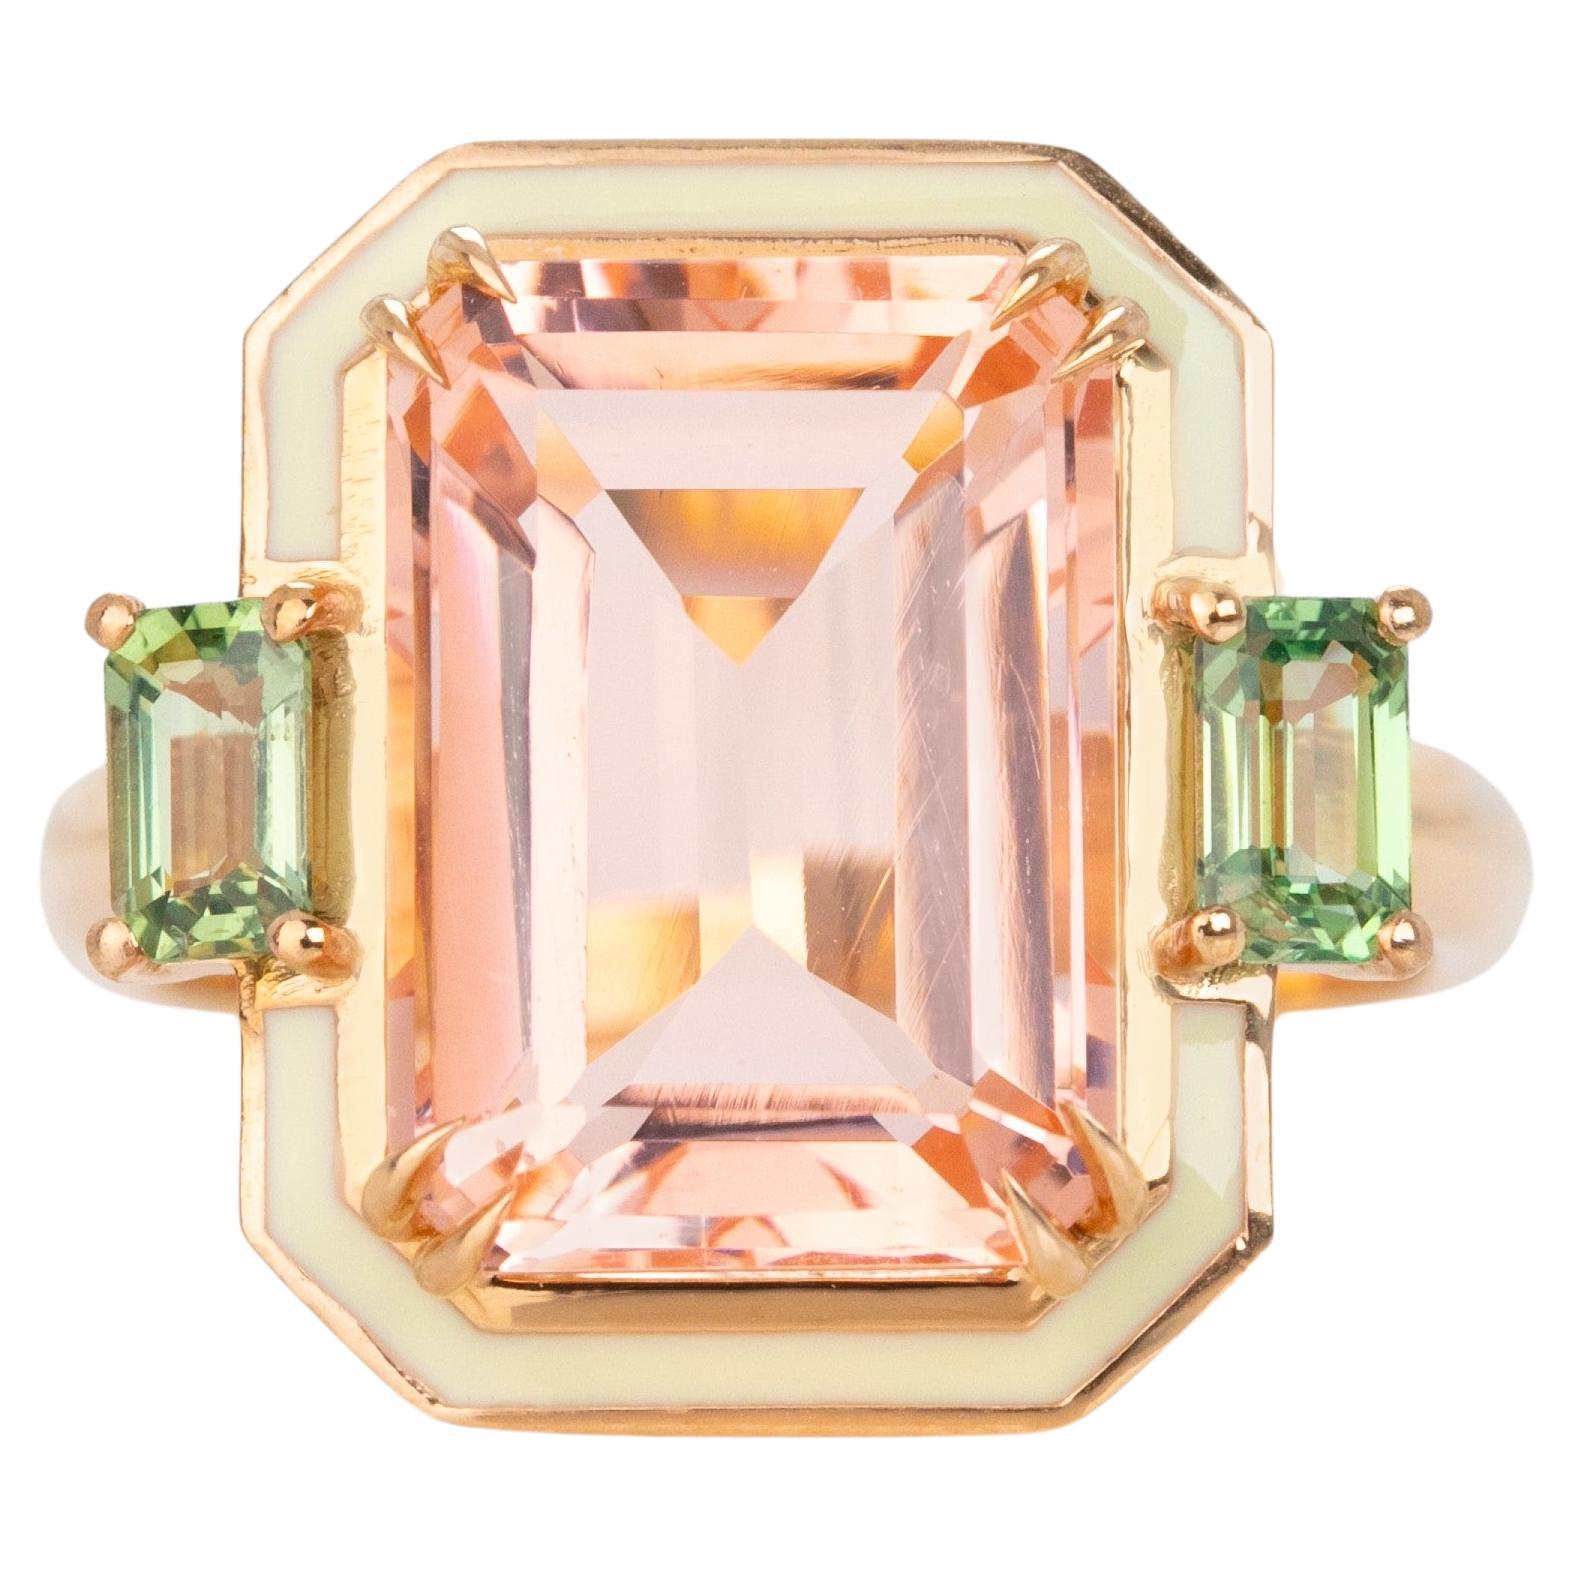 For Sale:  14K Gold 6.80 Ct Pink Topaz & Green Sapphire Enameled Cocktail Ring